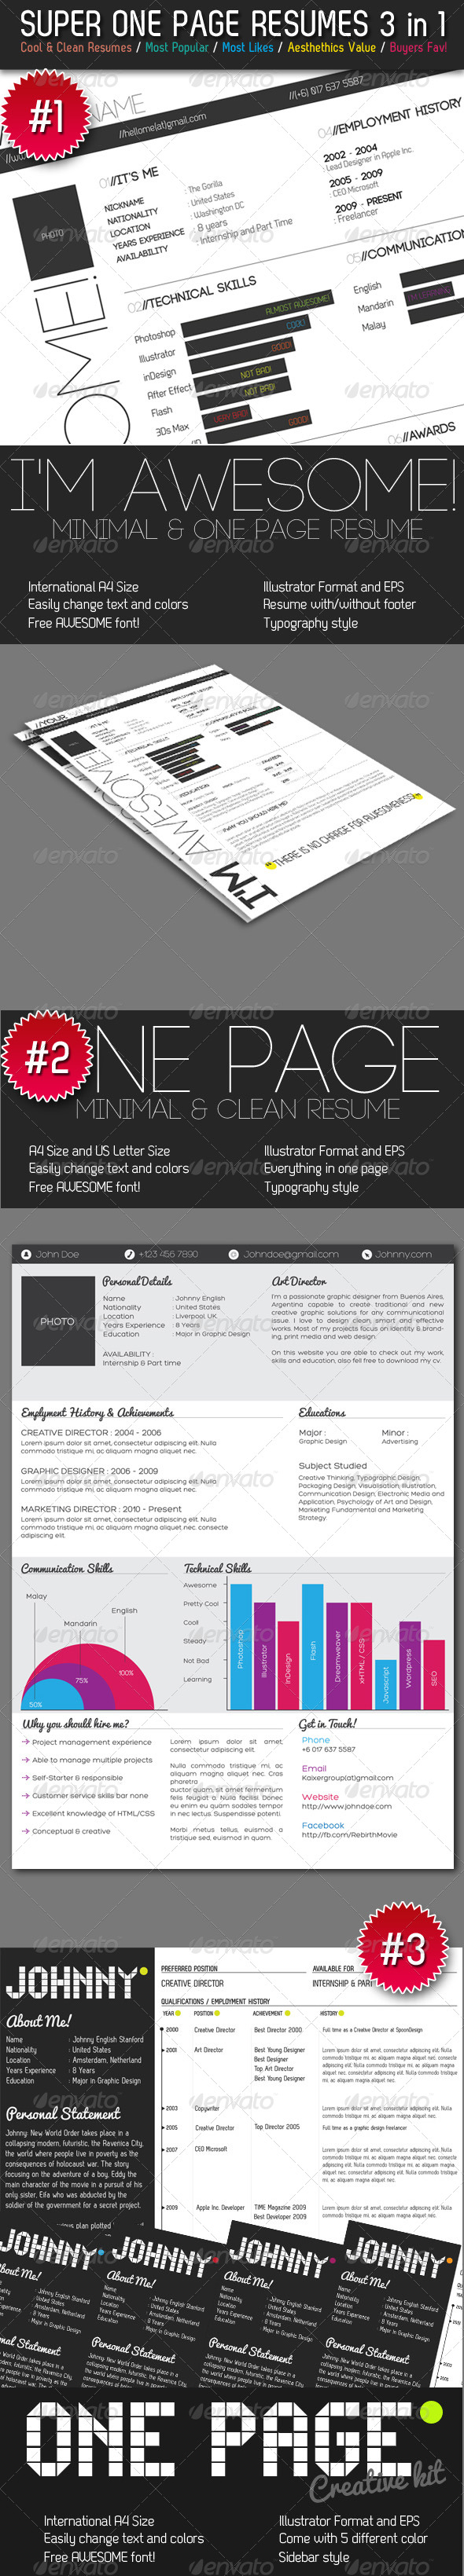 Super One Page Resumes Bundle 3 in 1